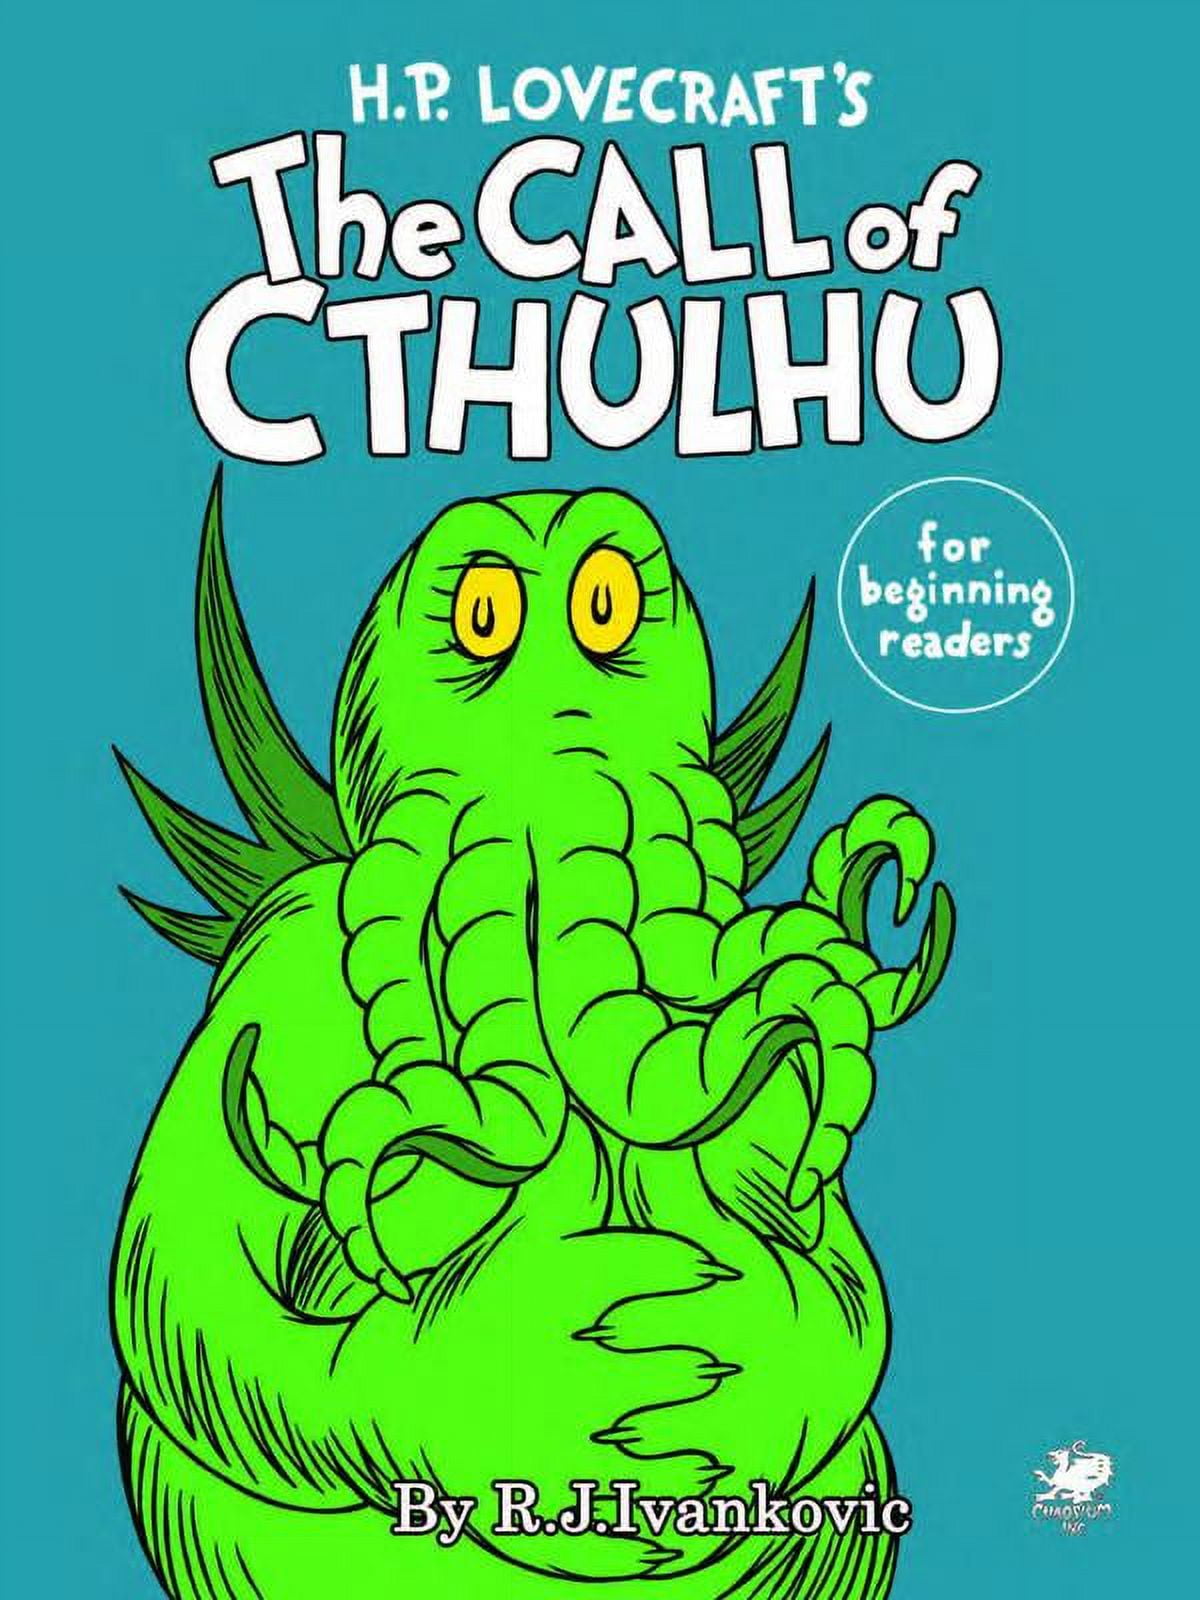  H.P. Lovecraft's the Call of Cthulhu for Beginning Readers:  9781568821122: Chaosium Inc, R. J. Ivankovic, R. J. Ivankovic, R. J.  Ivankovic: Books